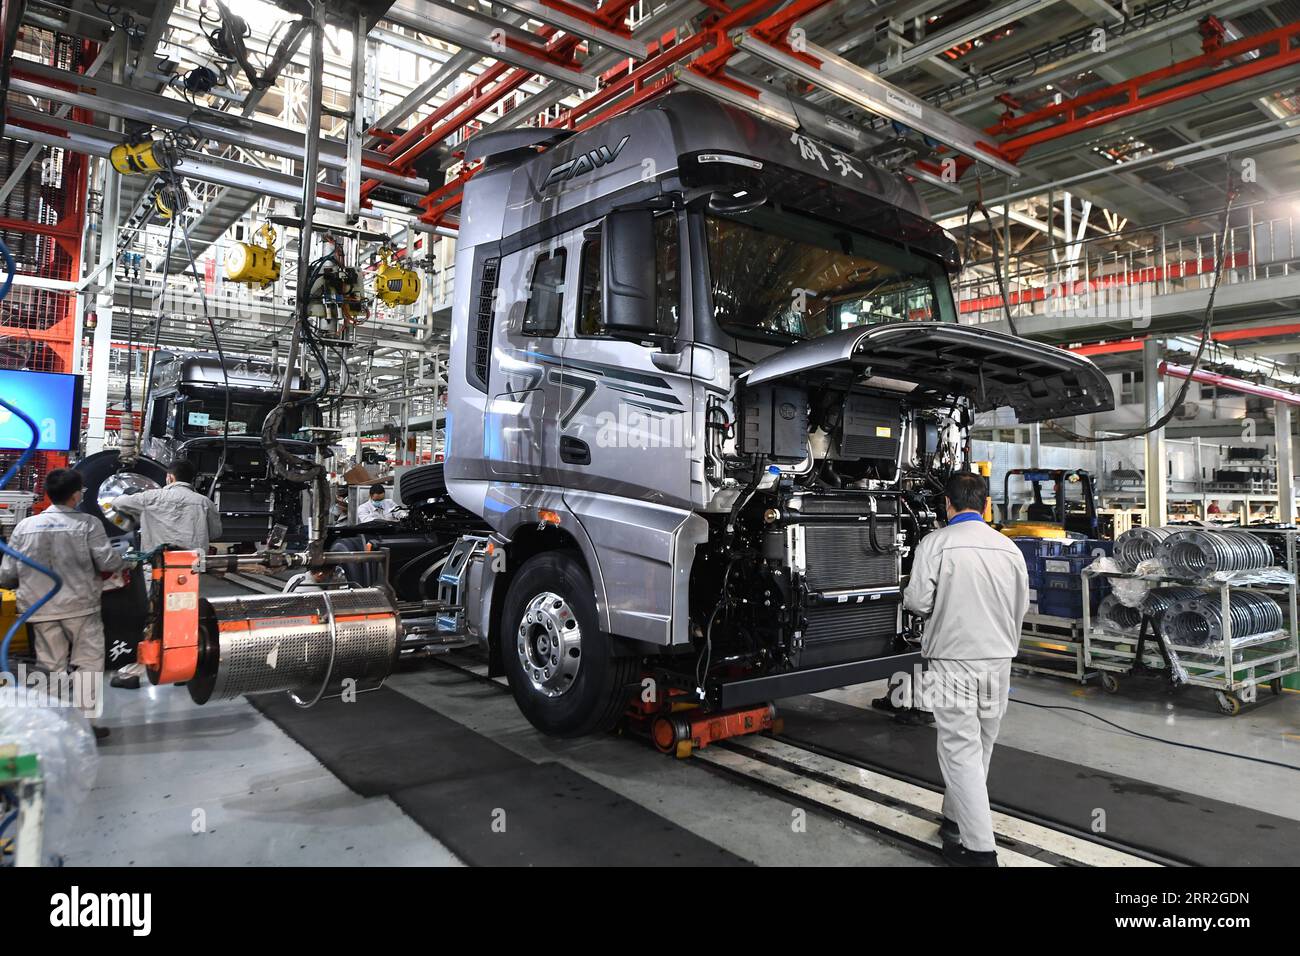 201012 -- CHANGCHUN, Oct. 12, 2020 -- Workers assemble vehicles at a factory of the First Automotive Works FAW Group Co., Ltd. in Changchun, capital of northeast China s Jilin Province, Sept. 23, 2020. China s leading automaker First Automotive Works FAW Group Co., Ltd. sold 2,656,744 vehicles in the first three quarters of the year, up 8 percent year on year, according to corporate sources.  CHINA-CHANGCHUN-FAW-SALES-GROWTH CN ZhangxNan PUBLICATIONxNOTxINxCHN Stock Photo